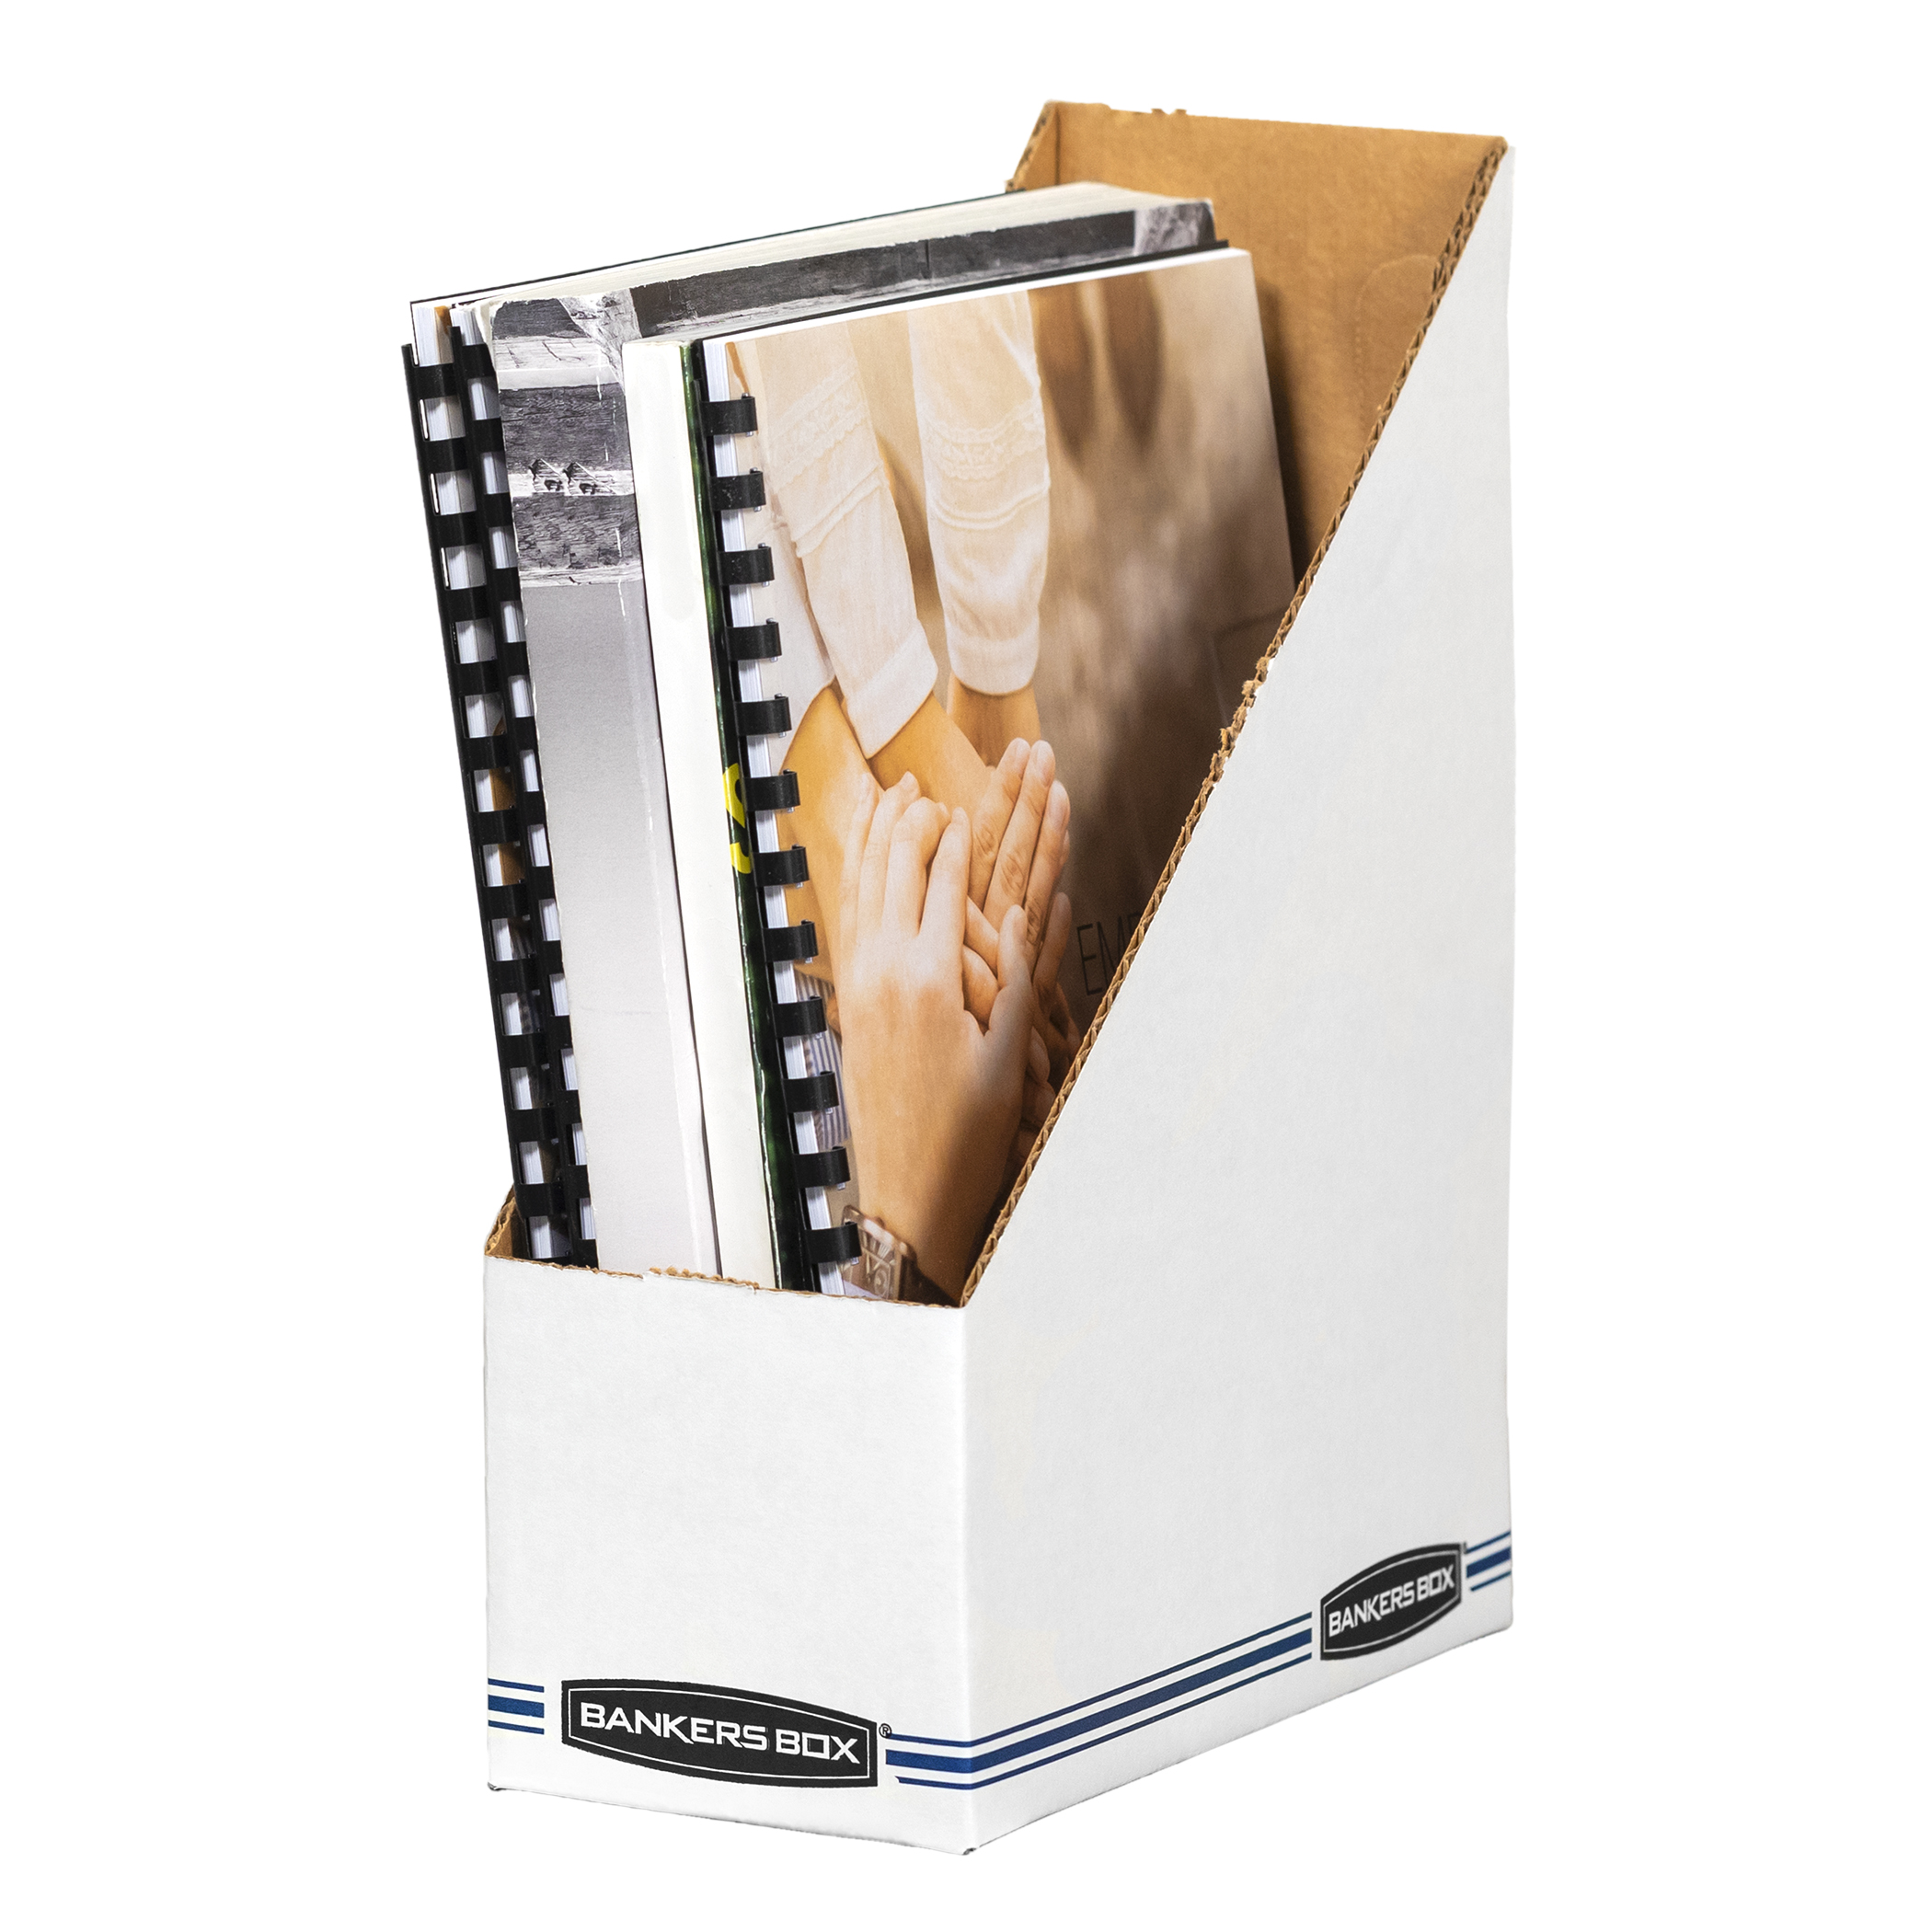 Fellowes Bankers Box Stor/File Magazine File - Corrugated Cardboard - image 3 of 9